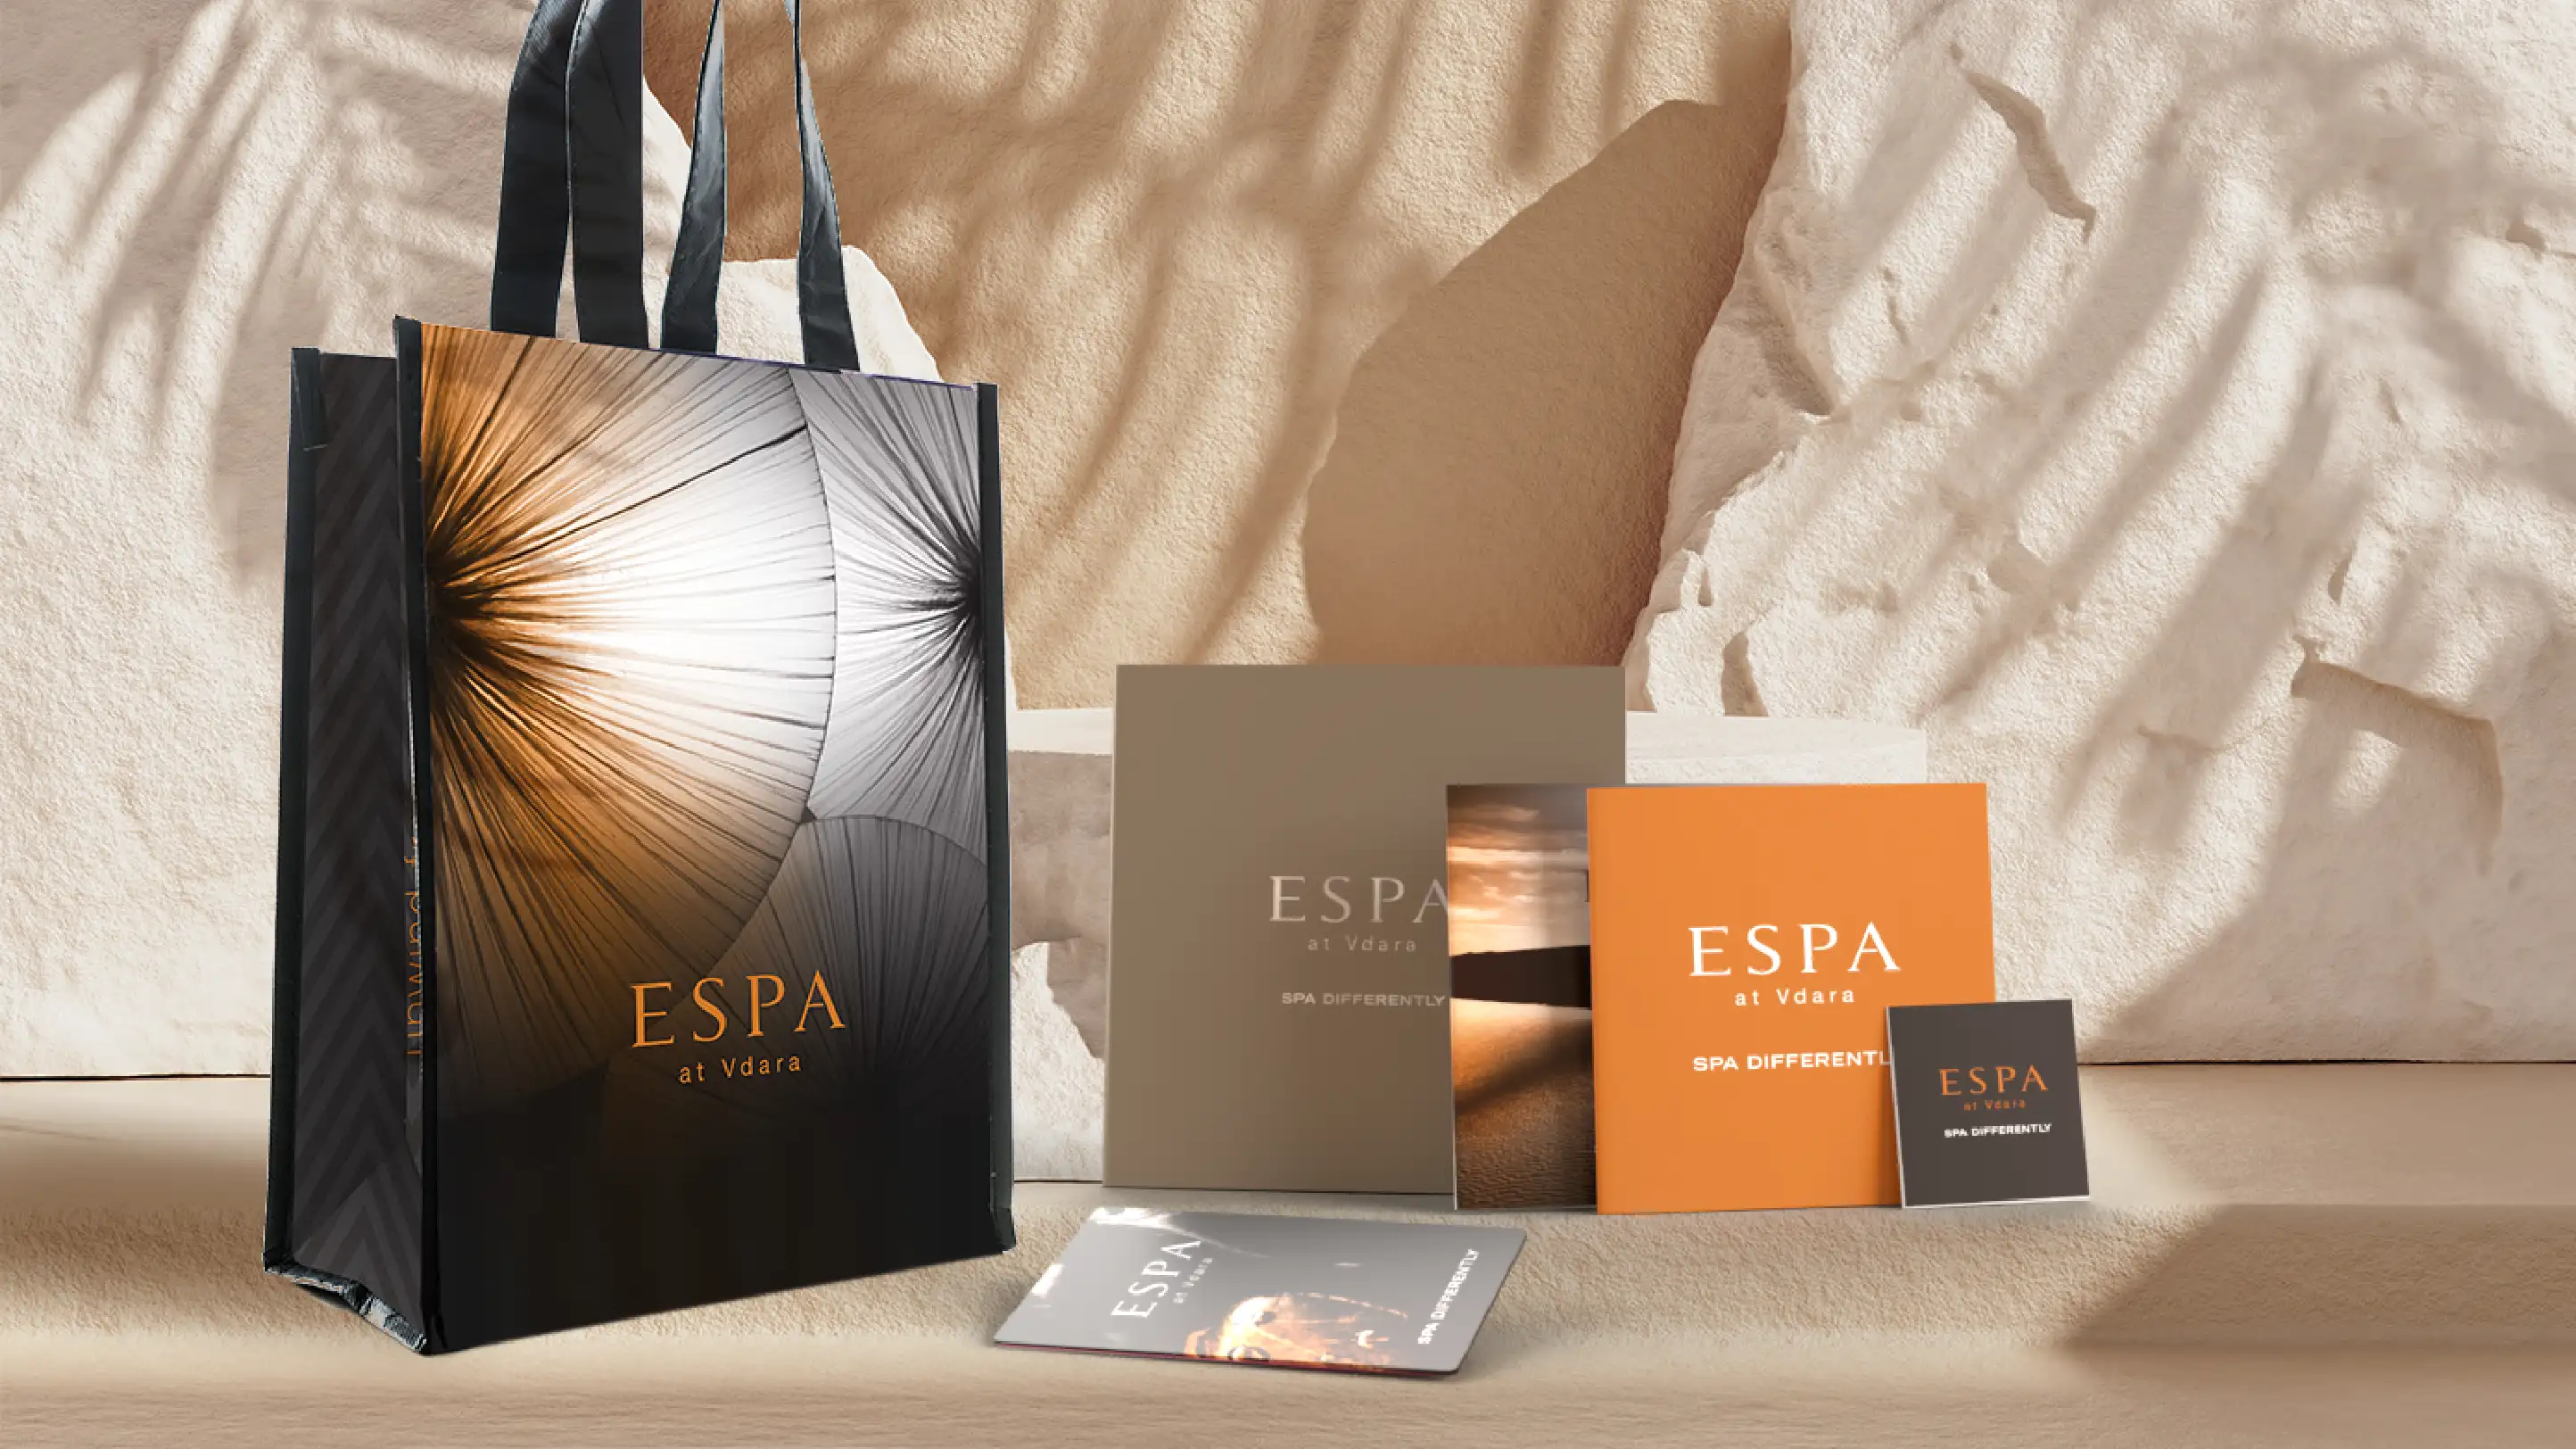 Espa at Vdara collateral design, with tote bag and hotel key card design.